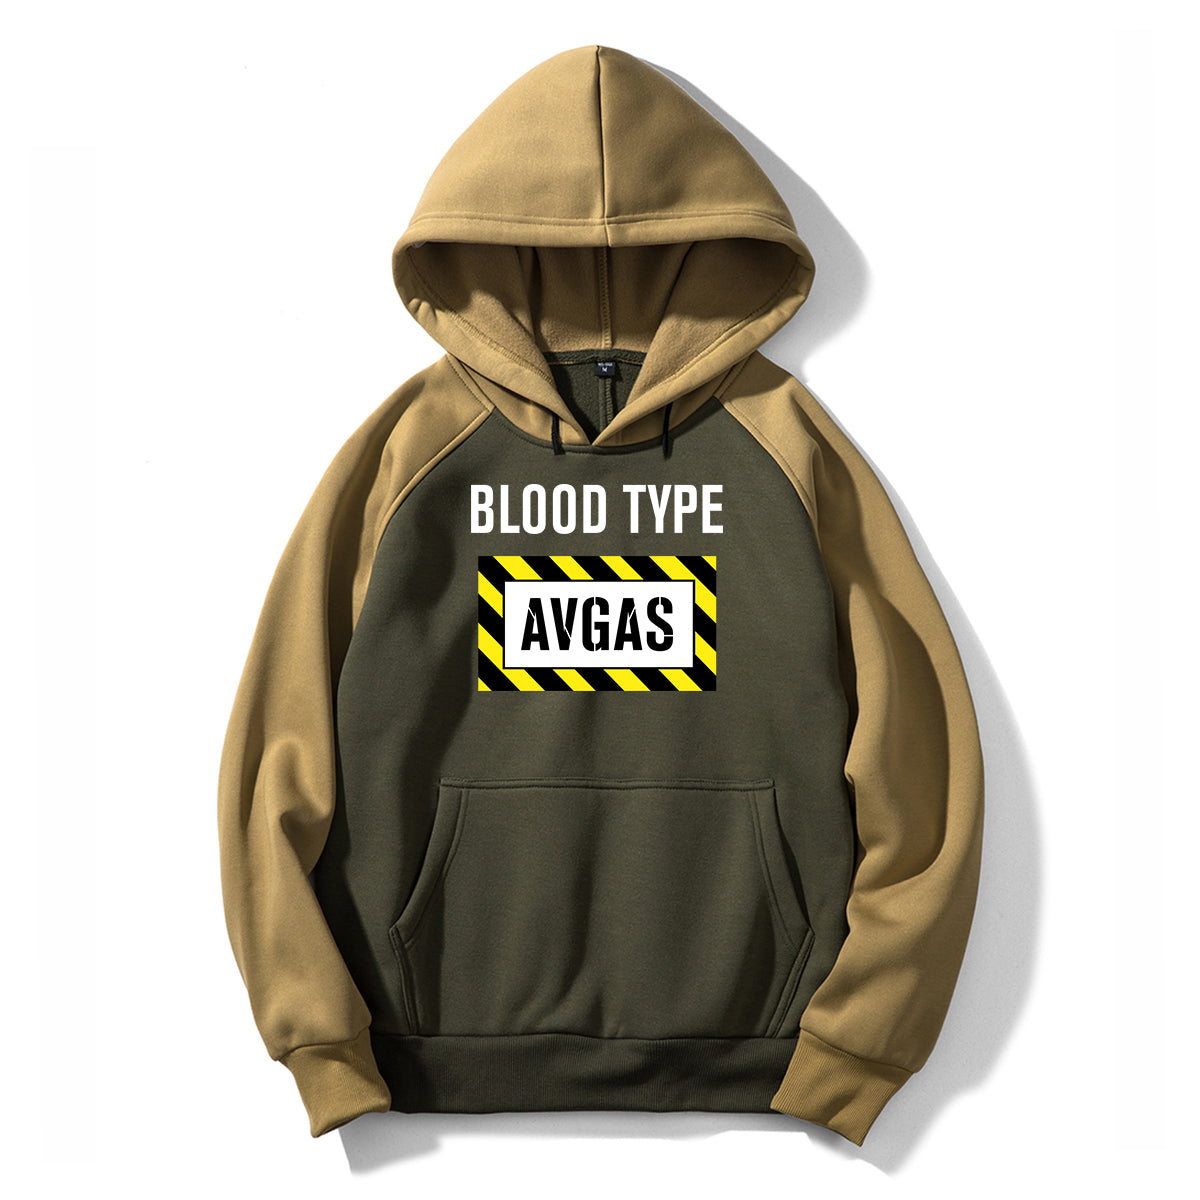 Blood Type AVGAS Designed Colourful Hoodies